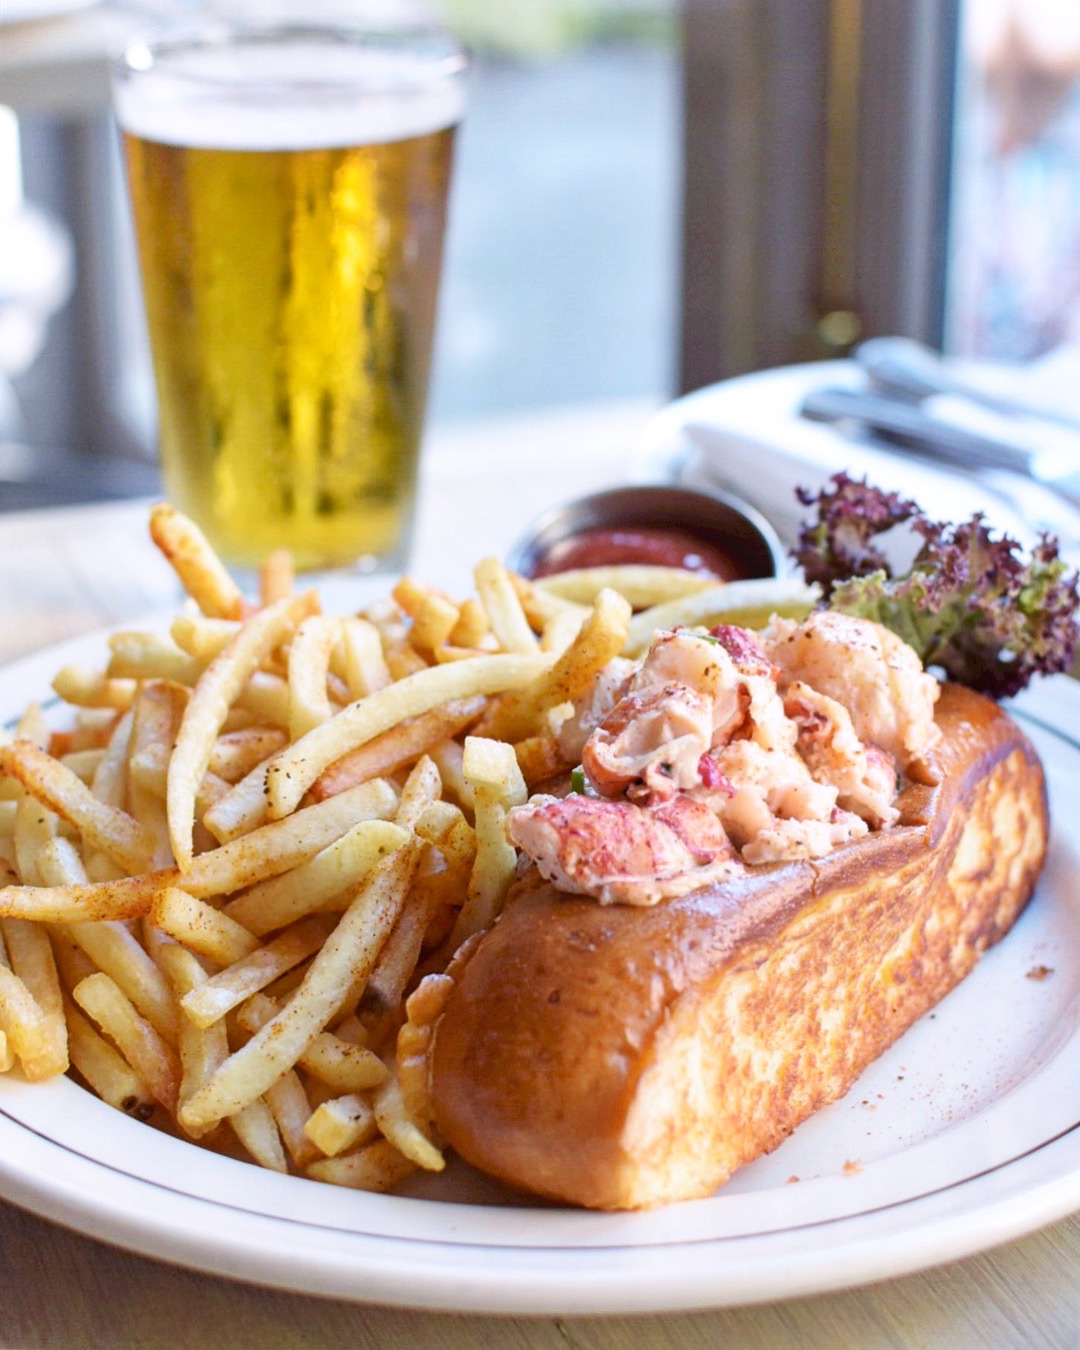 A buttered roll overflowing with lobster appears on a plate beside a pile of french fries.